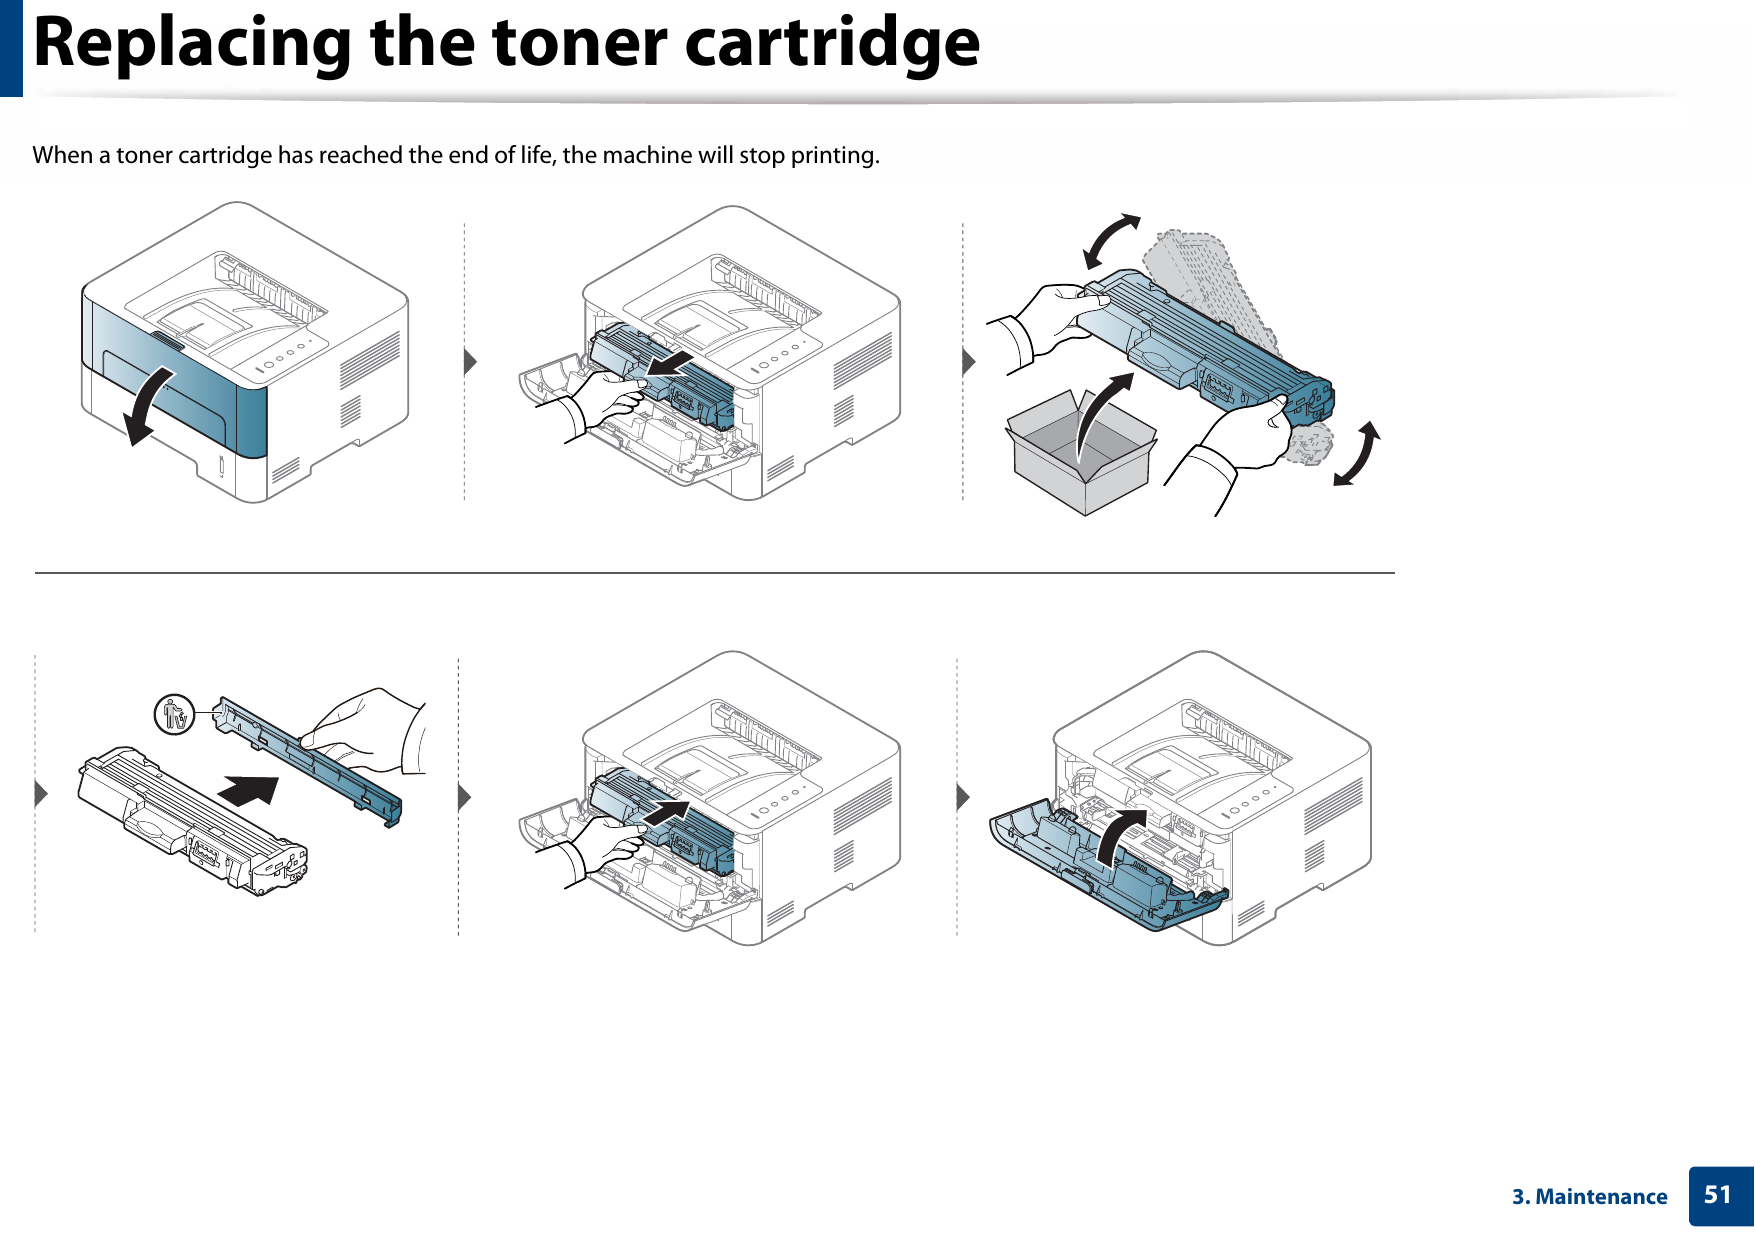 Replacing the toner cartridge513. MaintenanceWhen a toner cartridge has reached the end of life, the machine will stop printing.